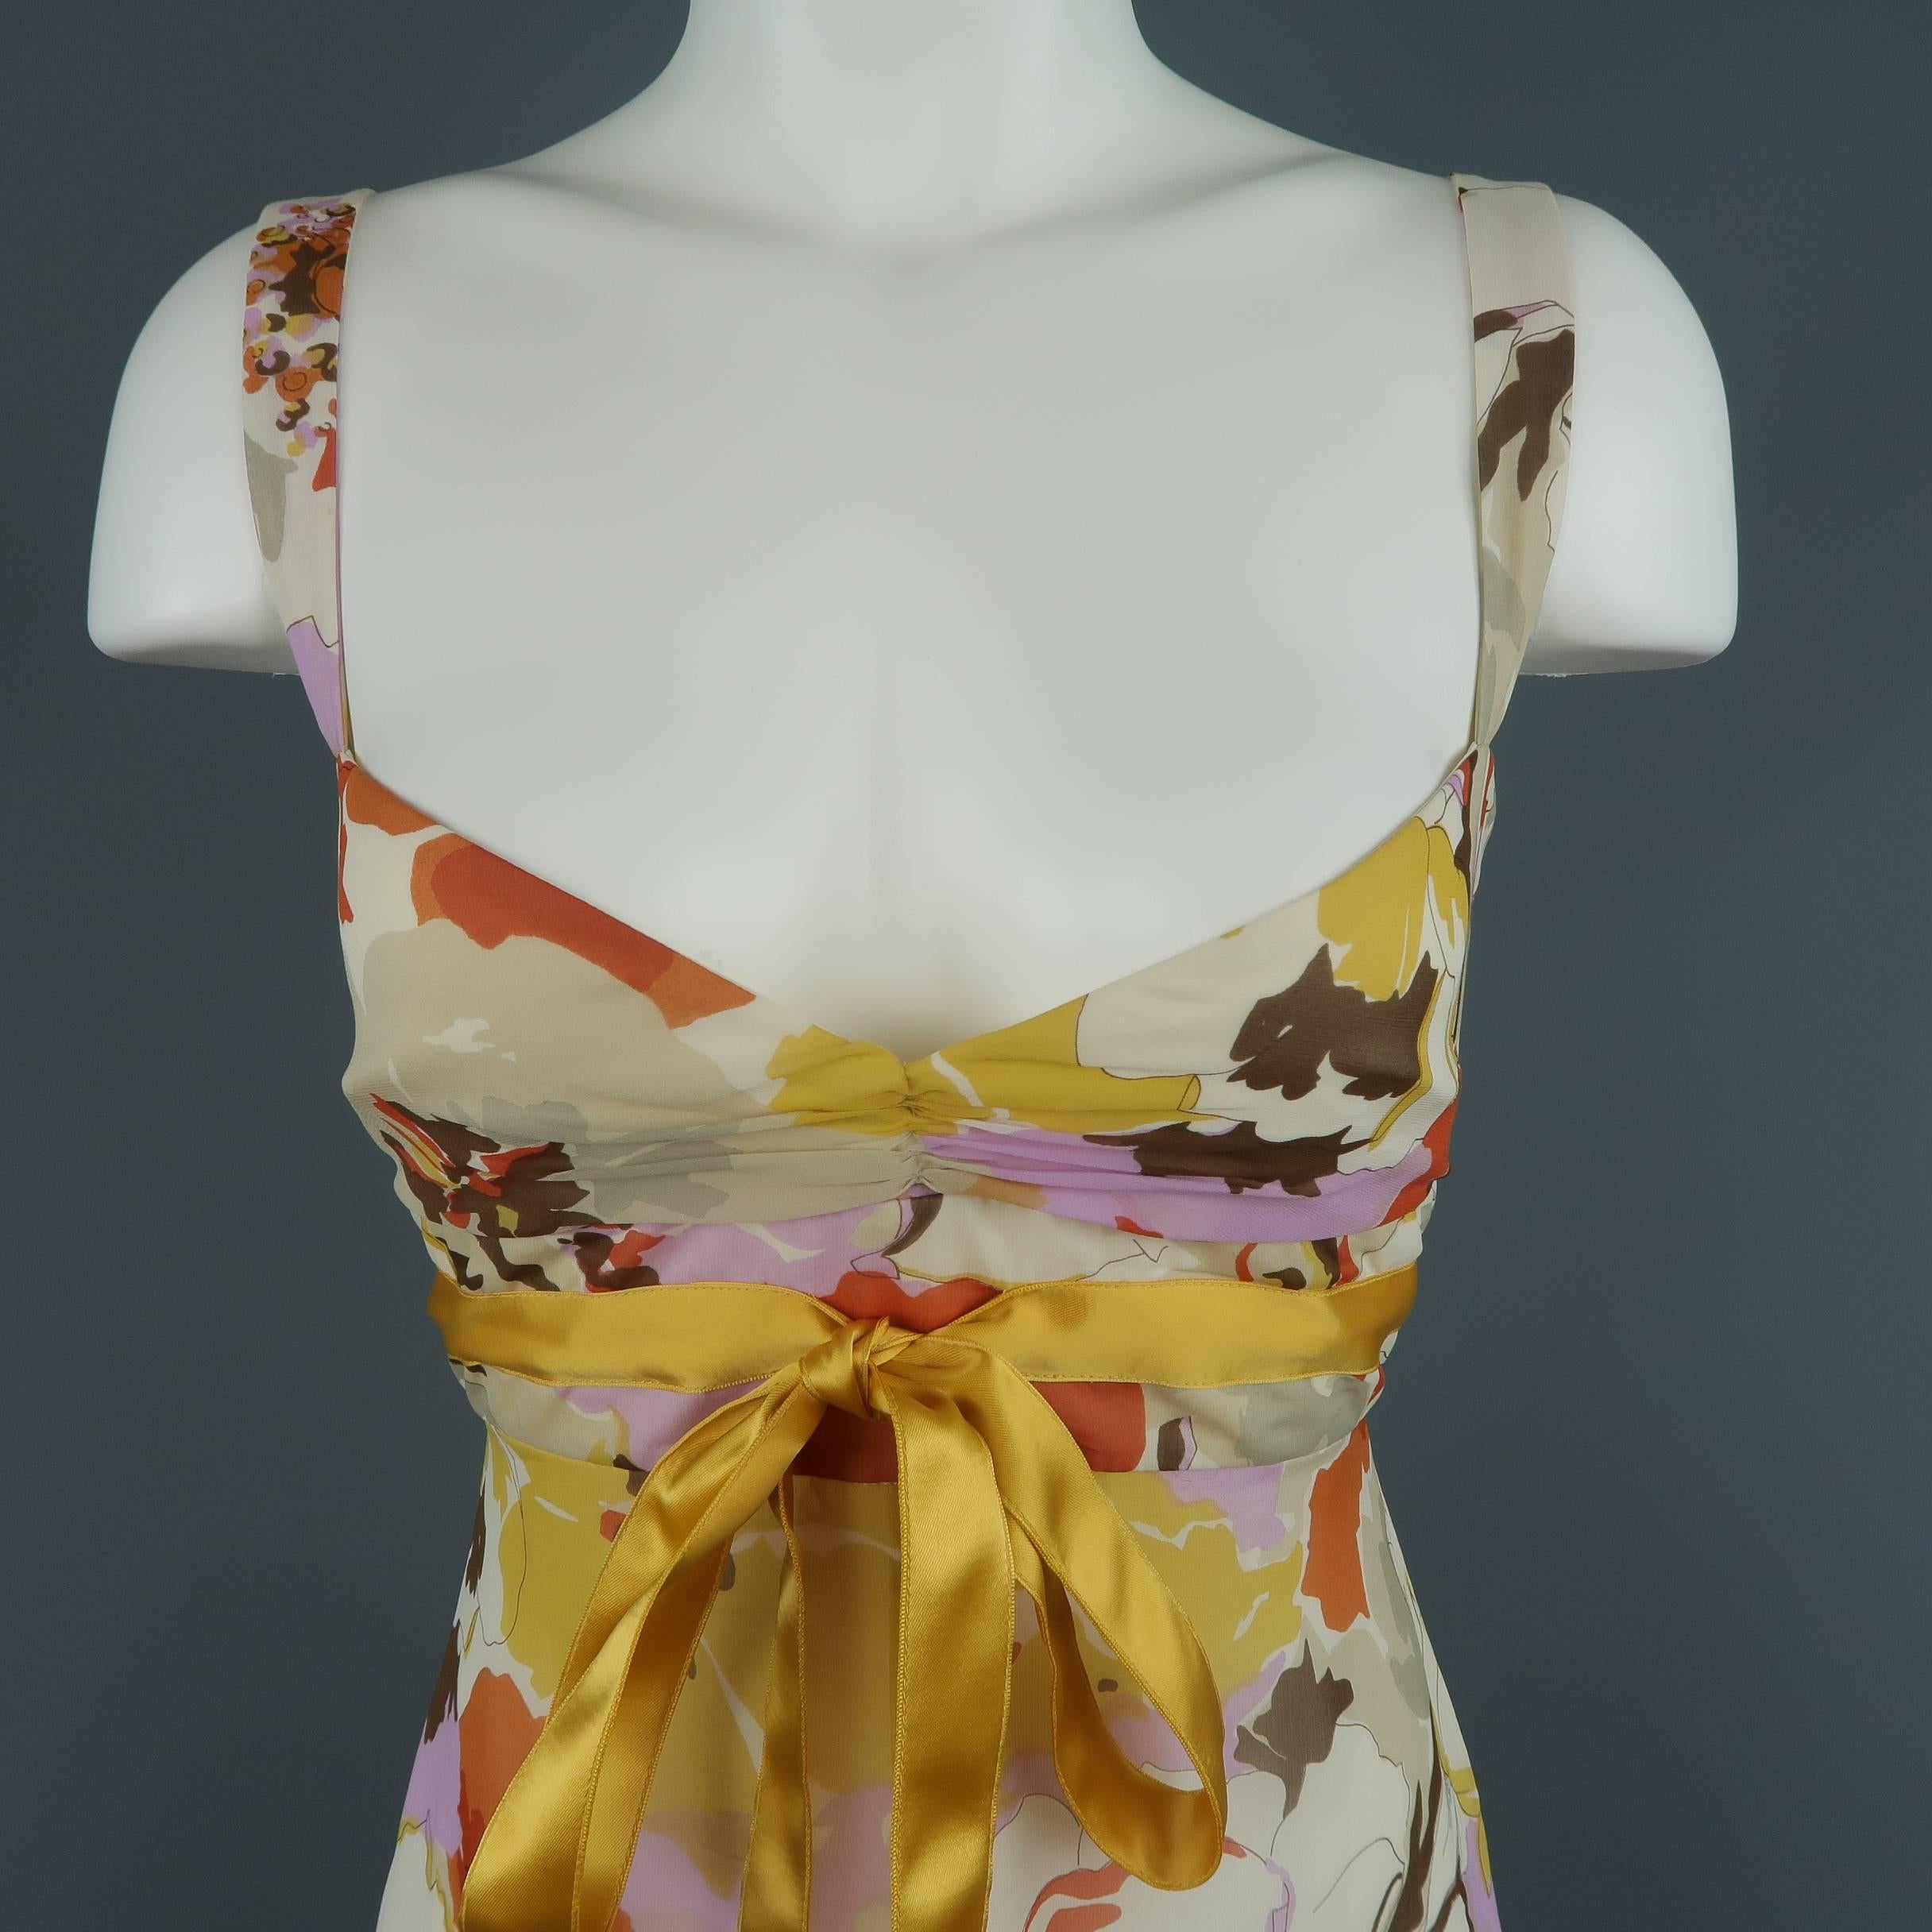 VALENTINO babydoll dress comes in orange purple and beige floral print silk chiffon with a gathered bust, empire waist with yellow satin bow, and A line skirt. Made in Italy.
 
Good Pre-Owned Condition.
Marked: (no size)
 
Measurements:
 
Bust: 34